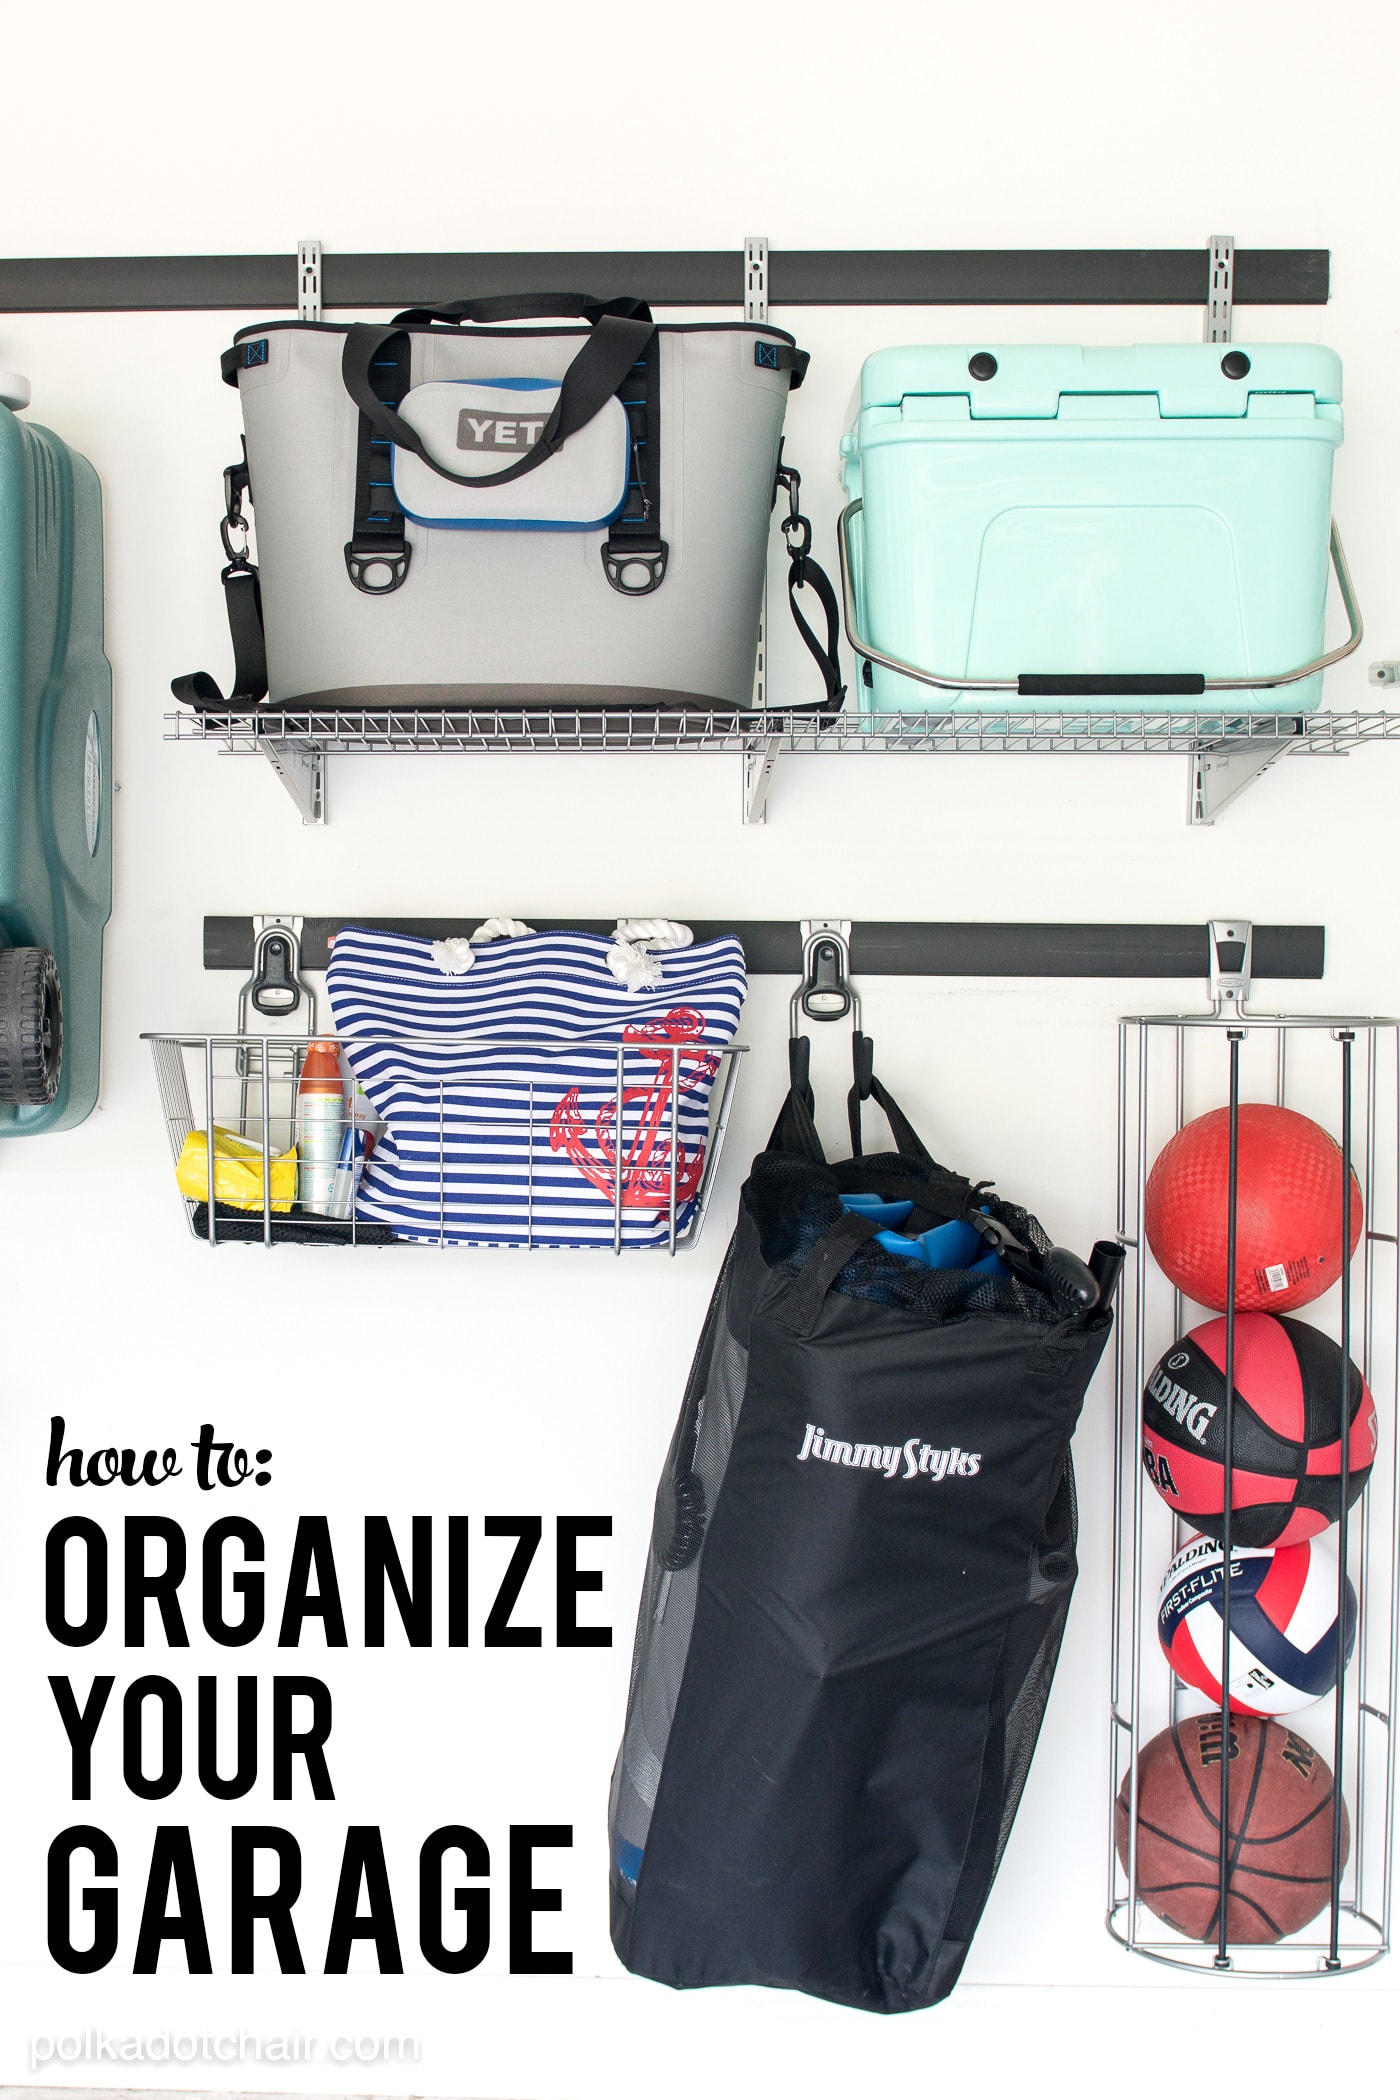 How to Organize your Garage